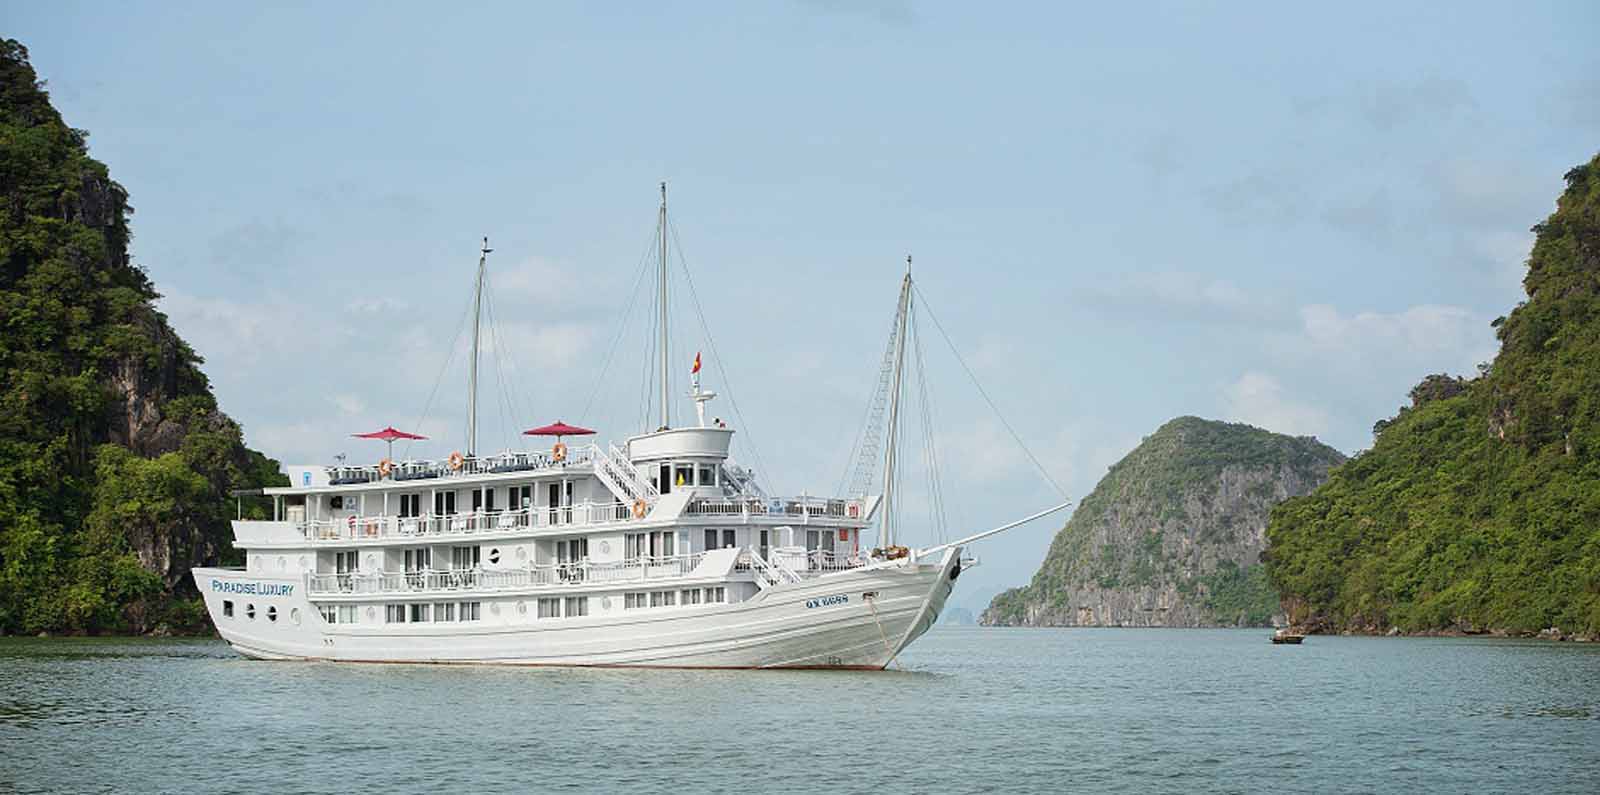 Four tips to maximize your Ha Long experience